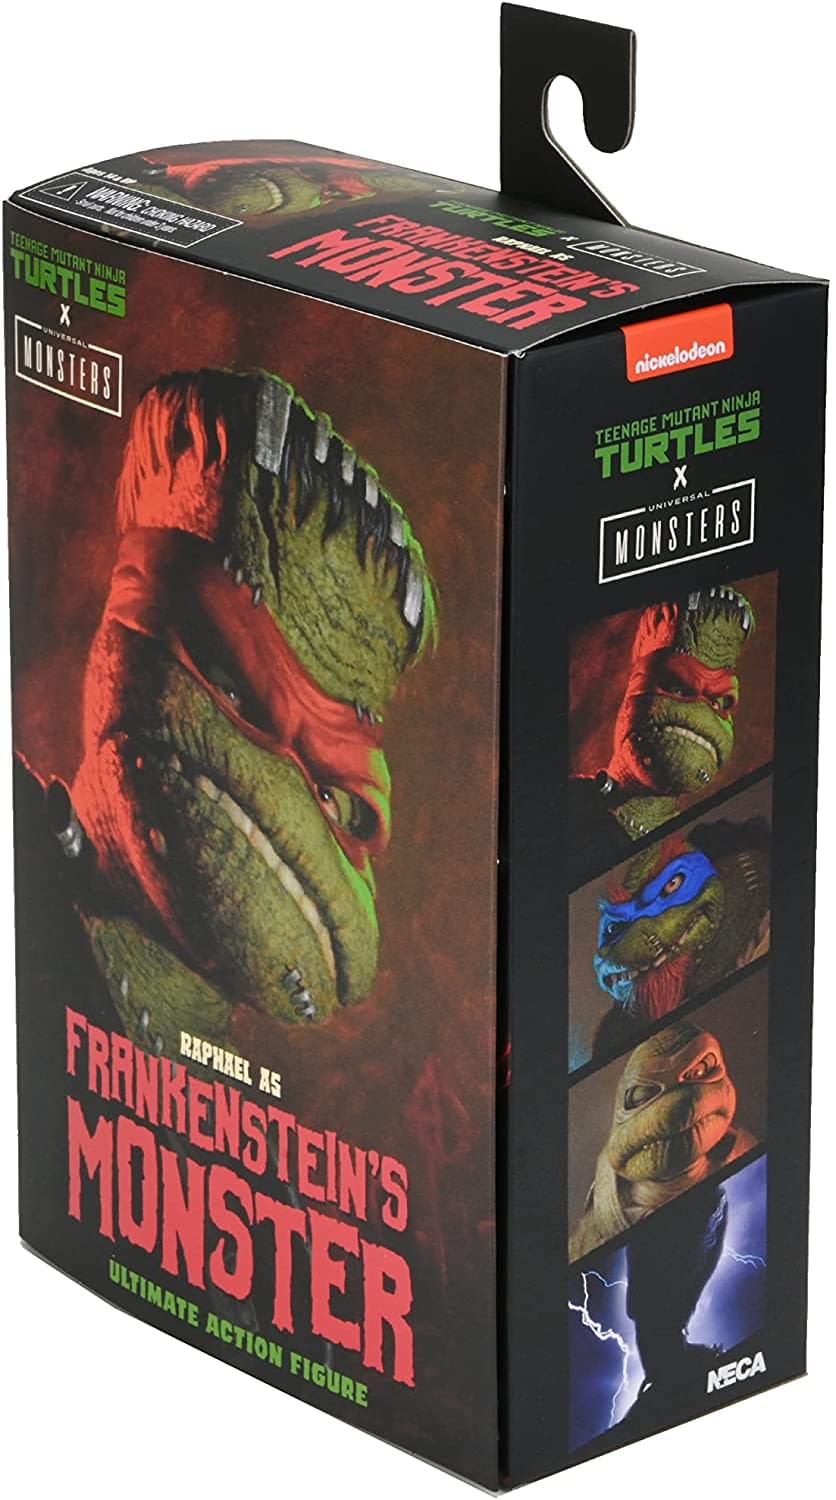 NECA Reveals Packaging For TMNT/Universal Monsters Mash-Up